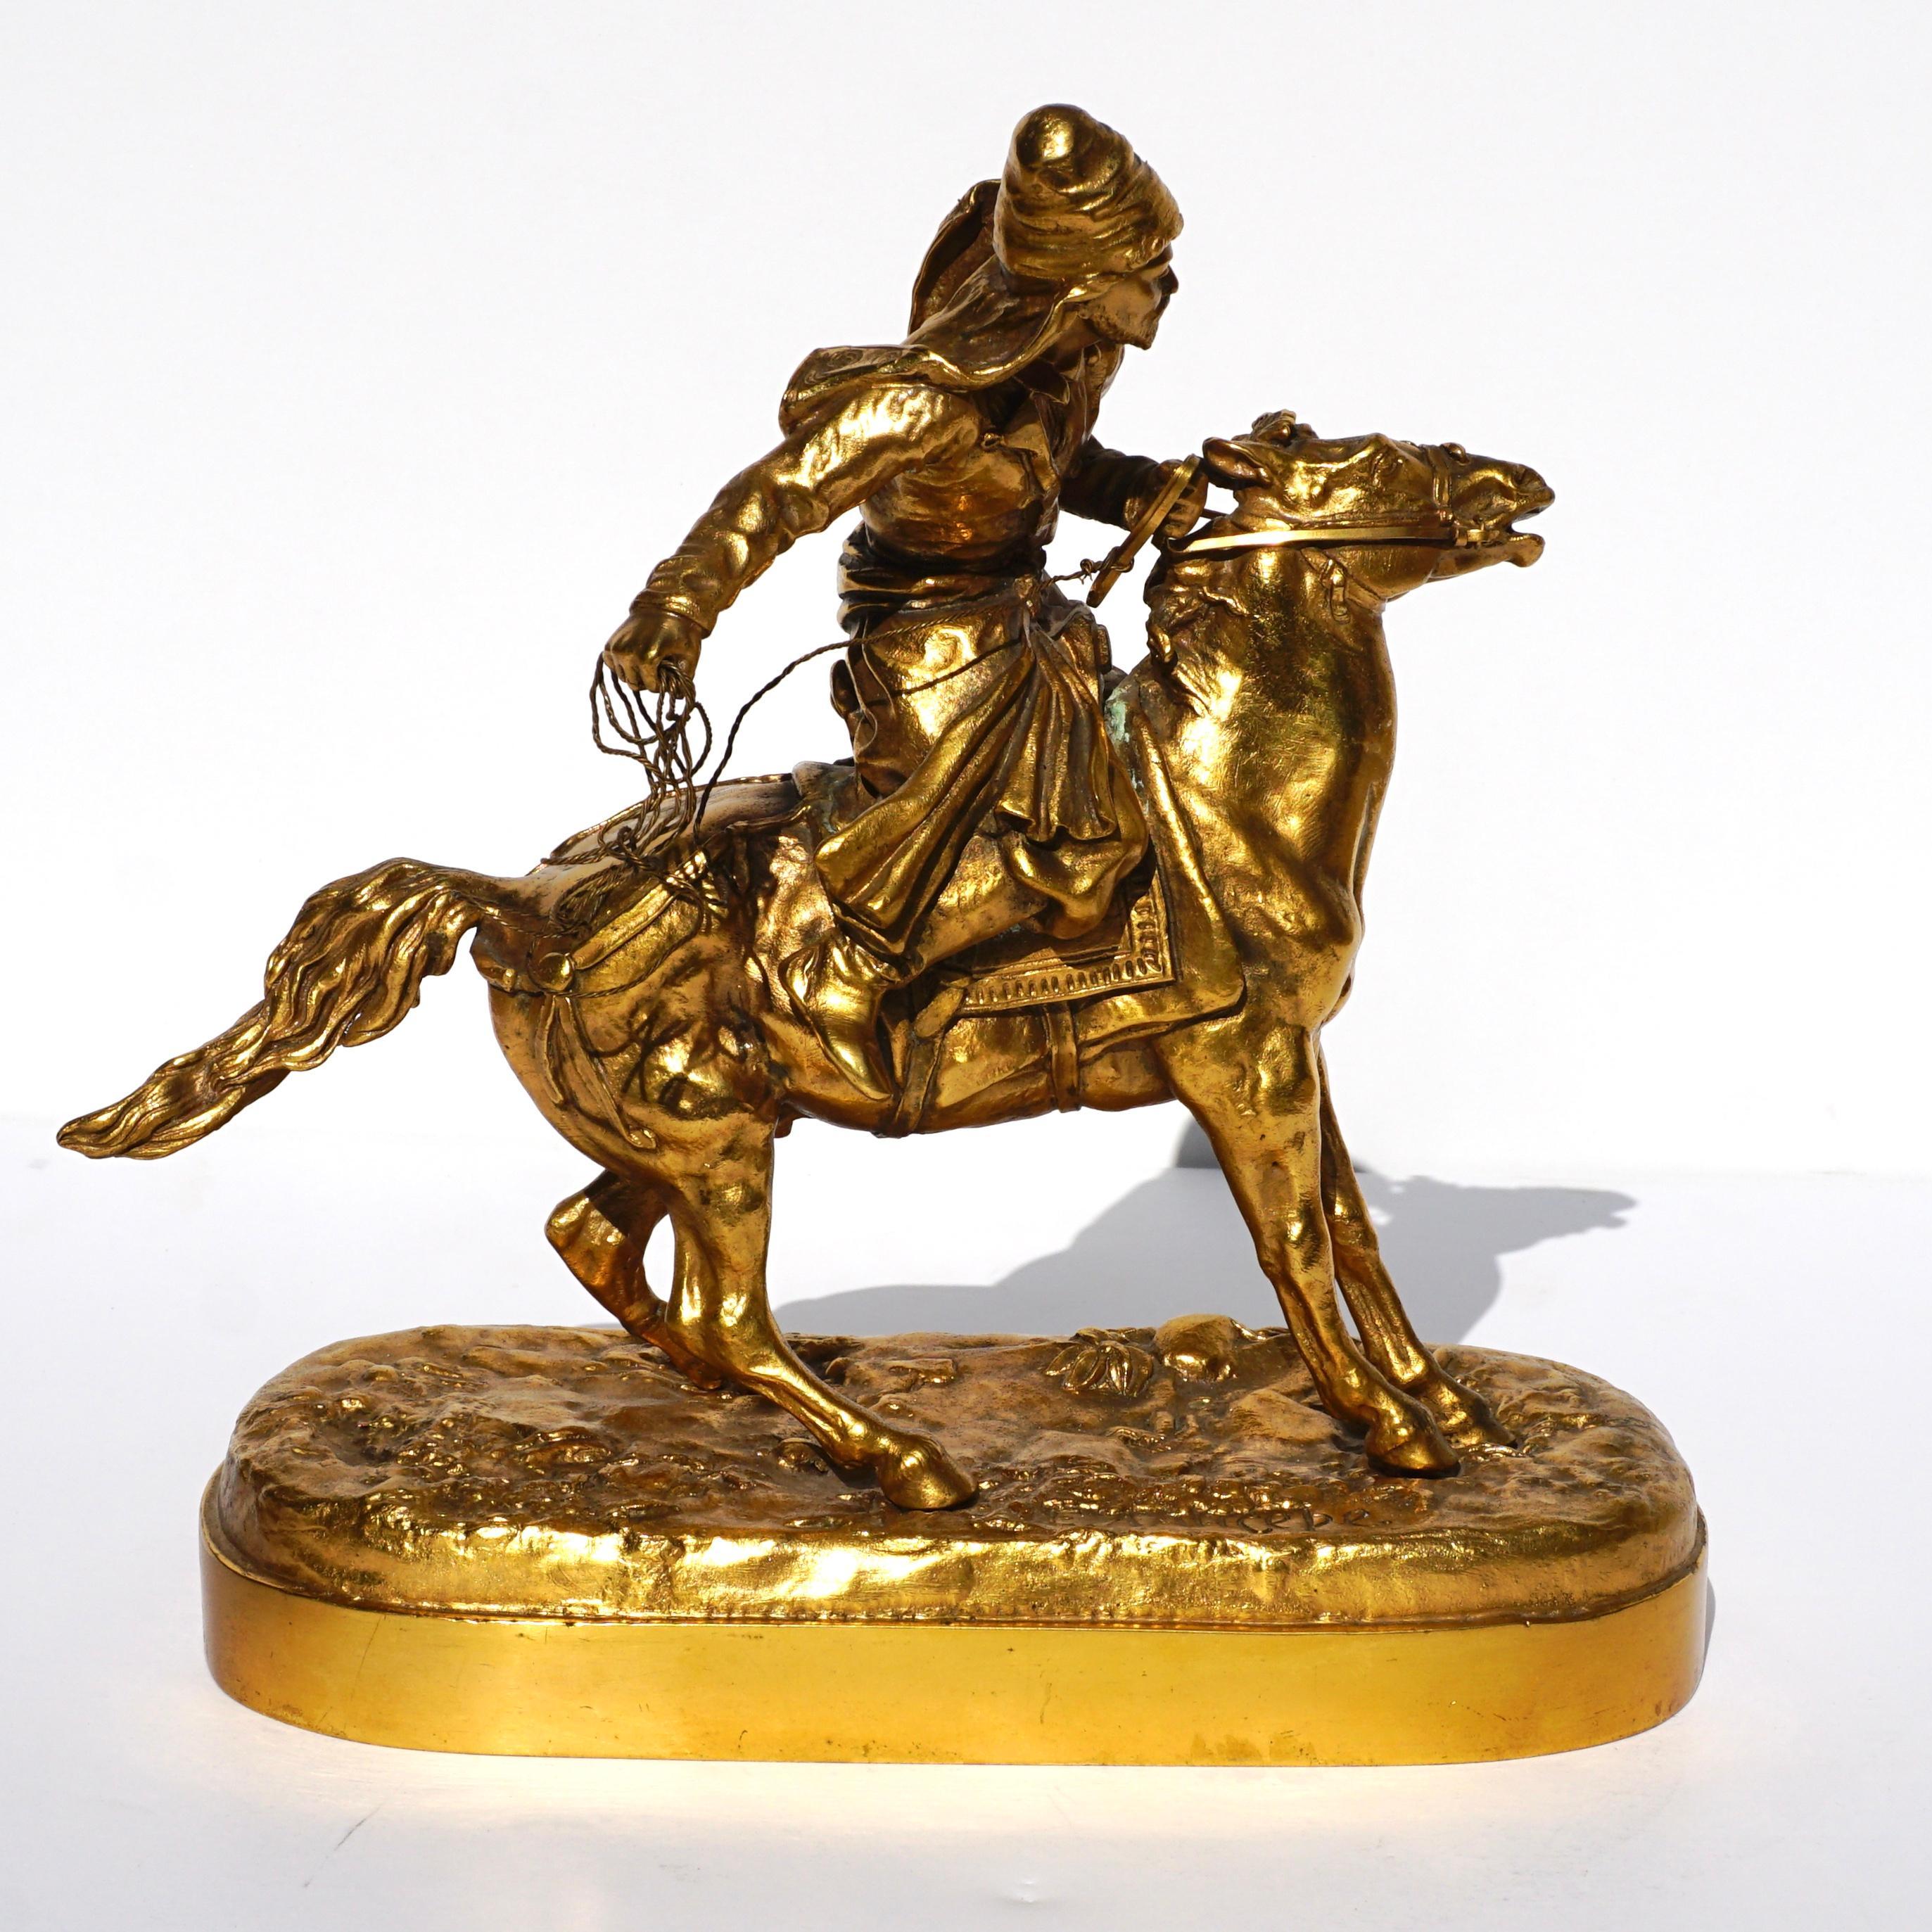 Evgeny Alexandrovich Lanceray (Russian, 1848-1886)
19th Century, Possibly post humus
Cossack on Horseback
Gilt bronze
signed in Cyrillic

Measures: Height 8 3/4 x width 8 3/4 inches.

Property from the Estate of Henri E. Nelson, Chicago,